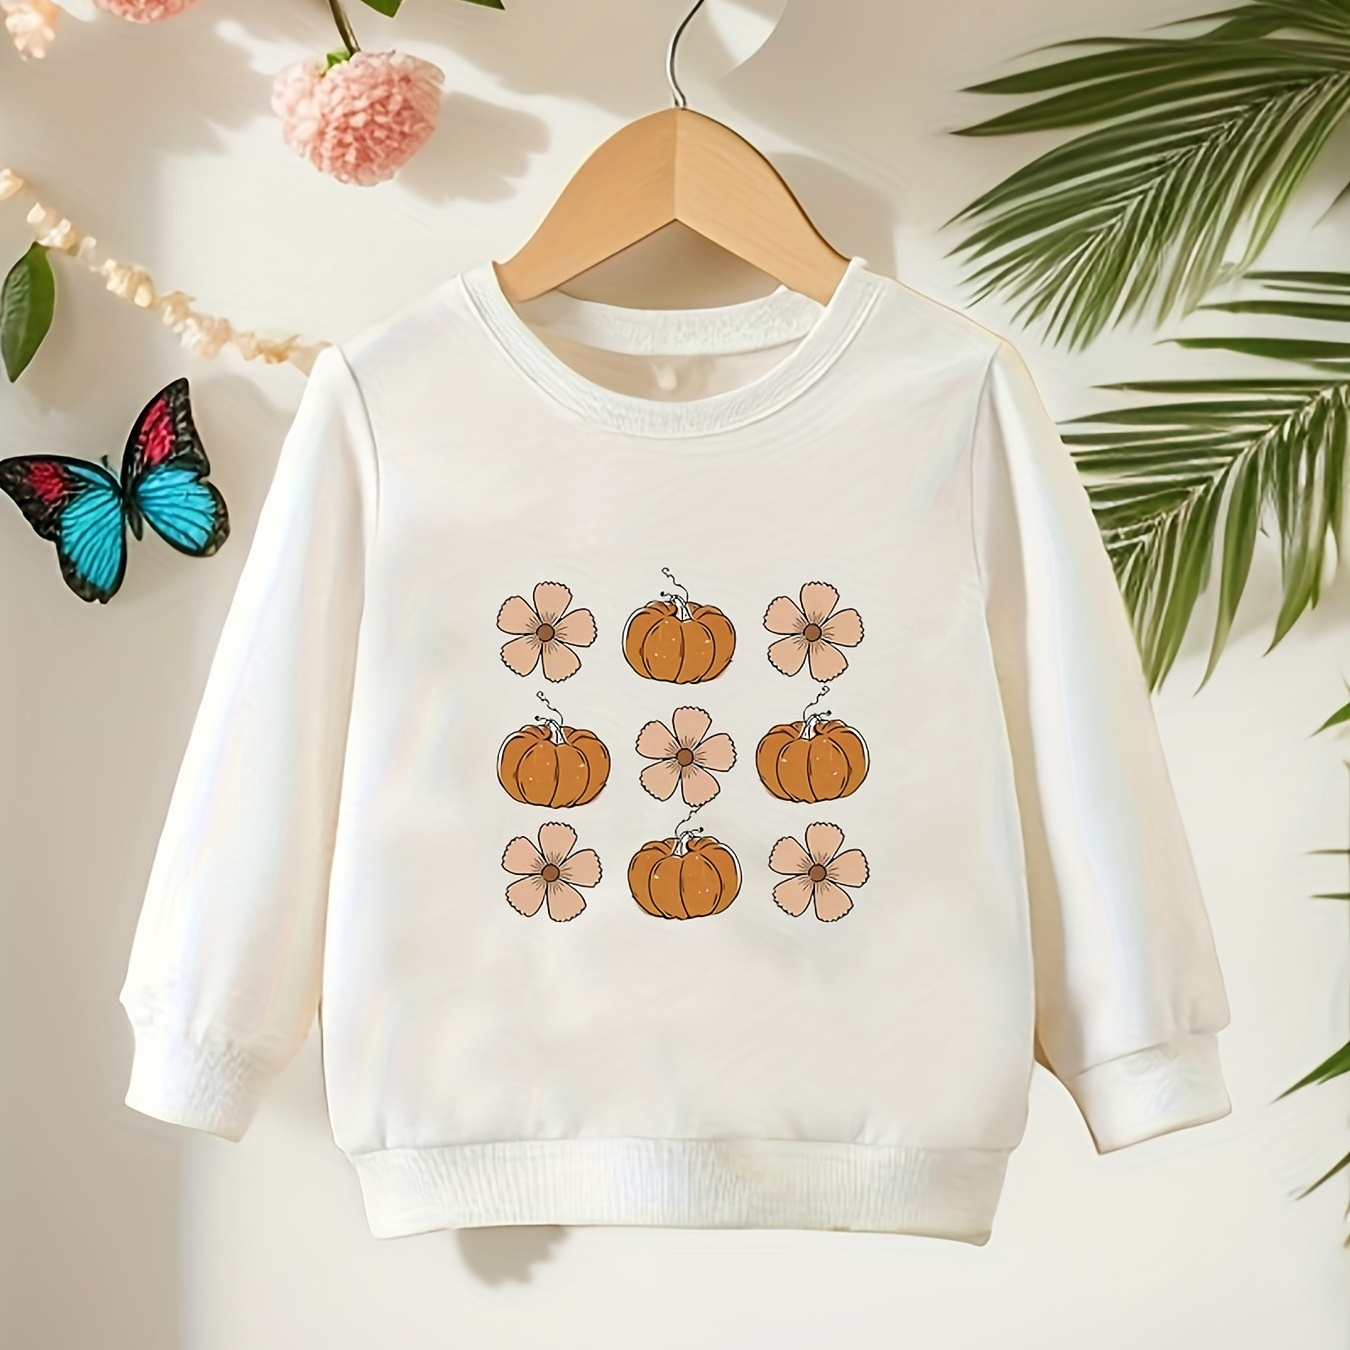 

Girl Flowers And Pumpkins Graphic Crew Neck Sweatshirt, Toddler Kids Party Casual Tops Holiday Gift